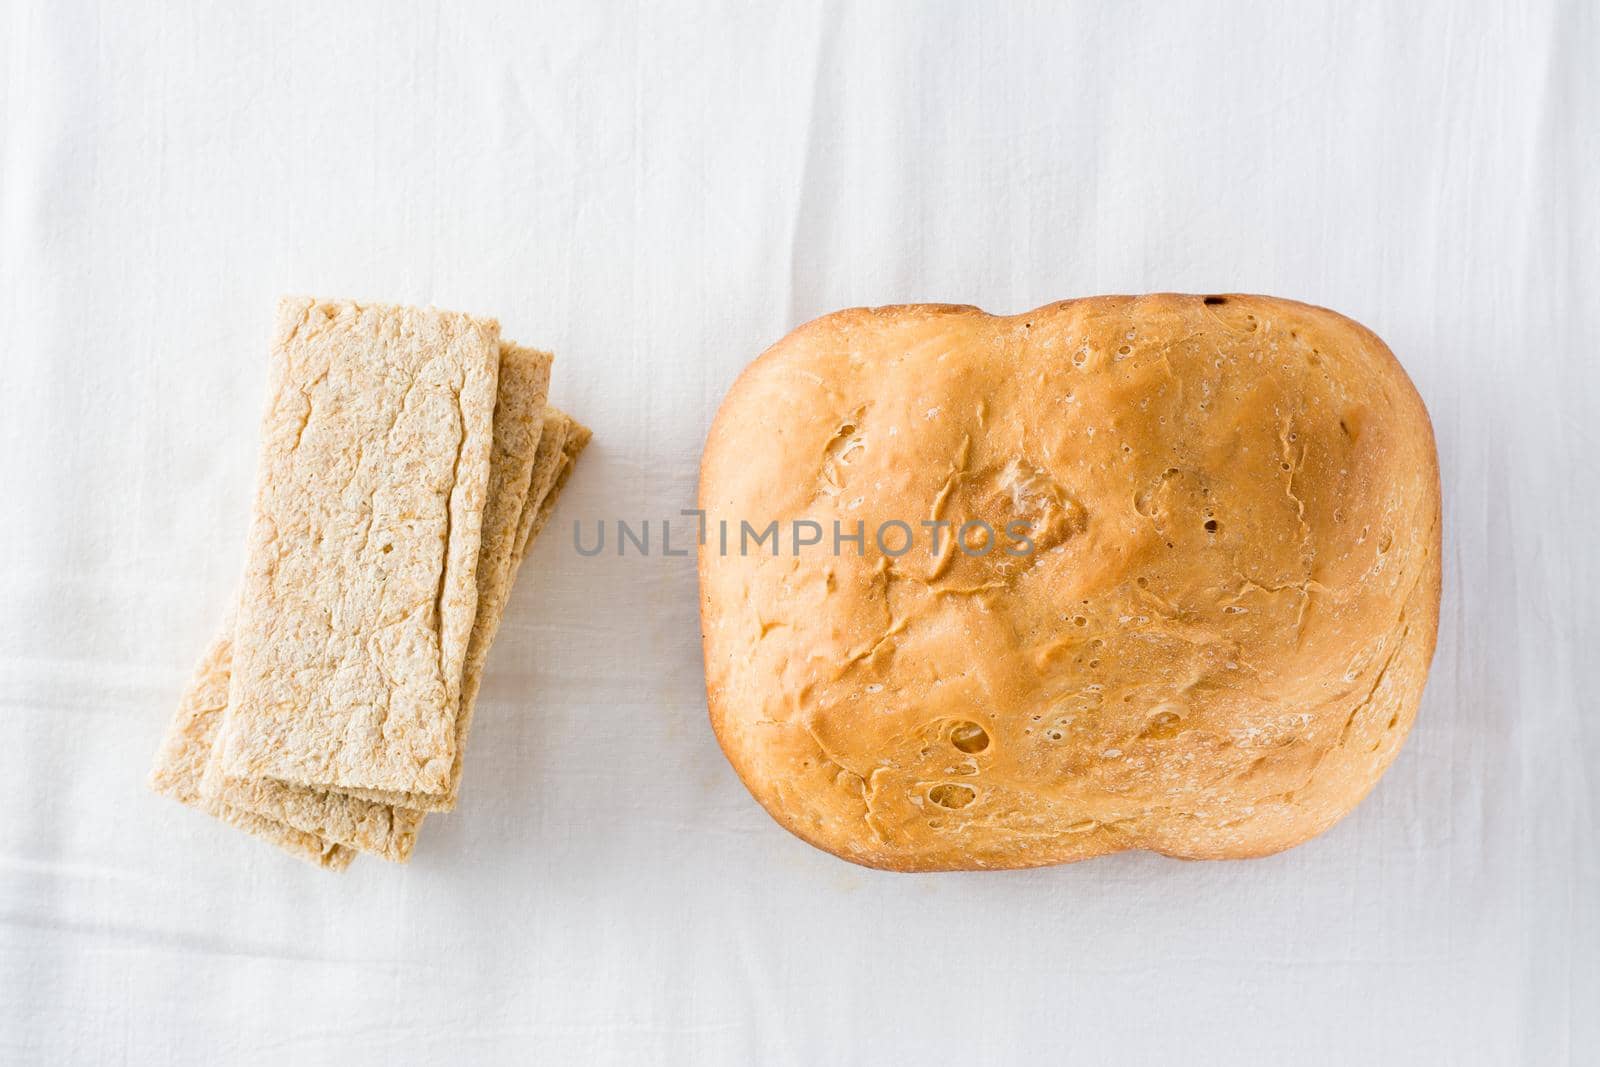 Concept of choice between fresh loaf of wheat homemade bread and cereal crispbread on white cloth. Top view